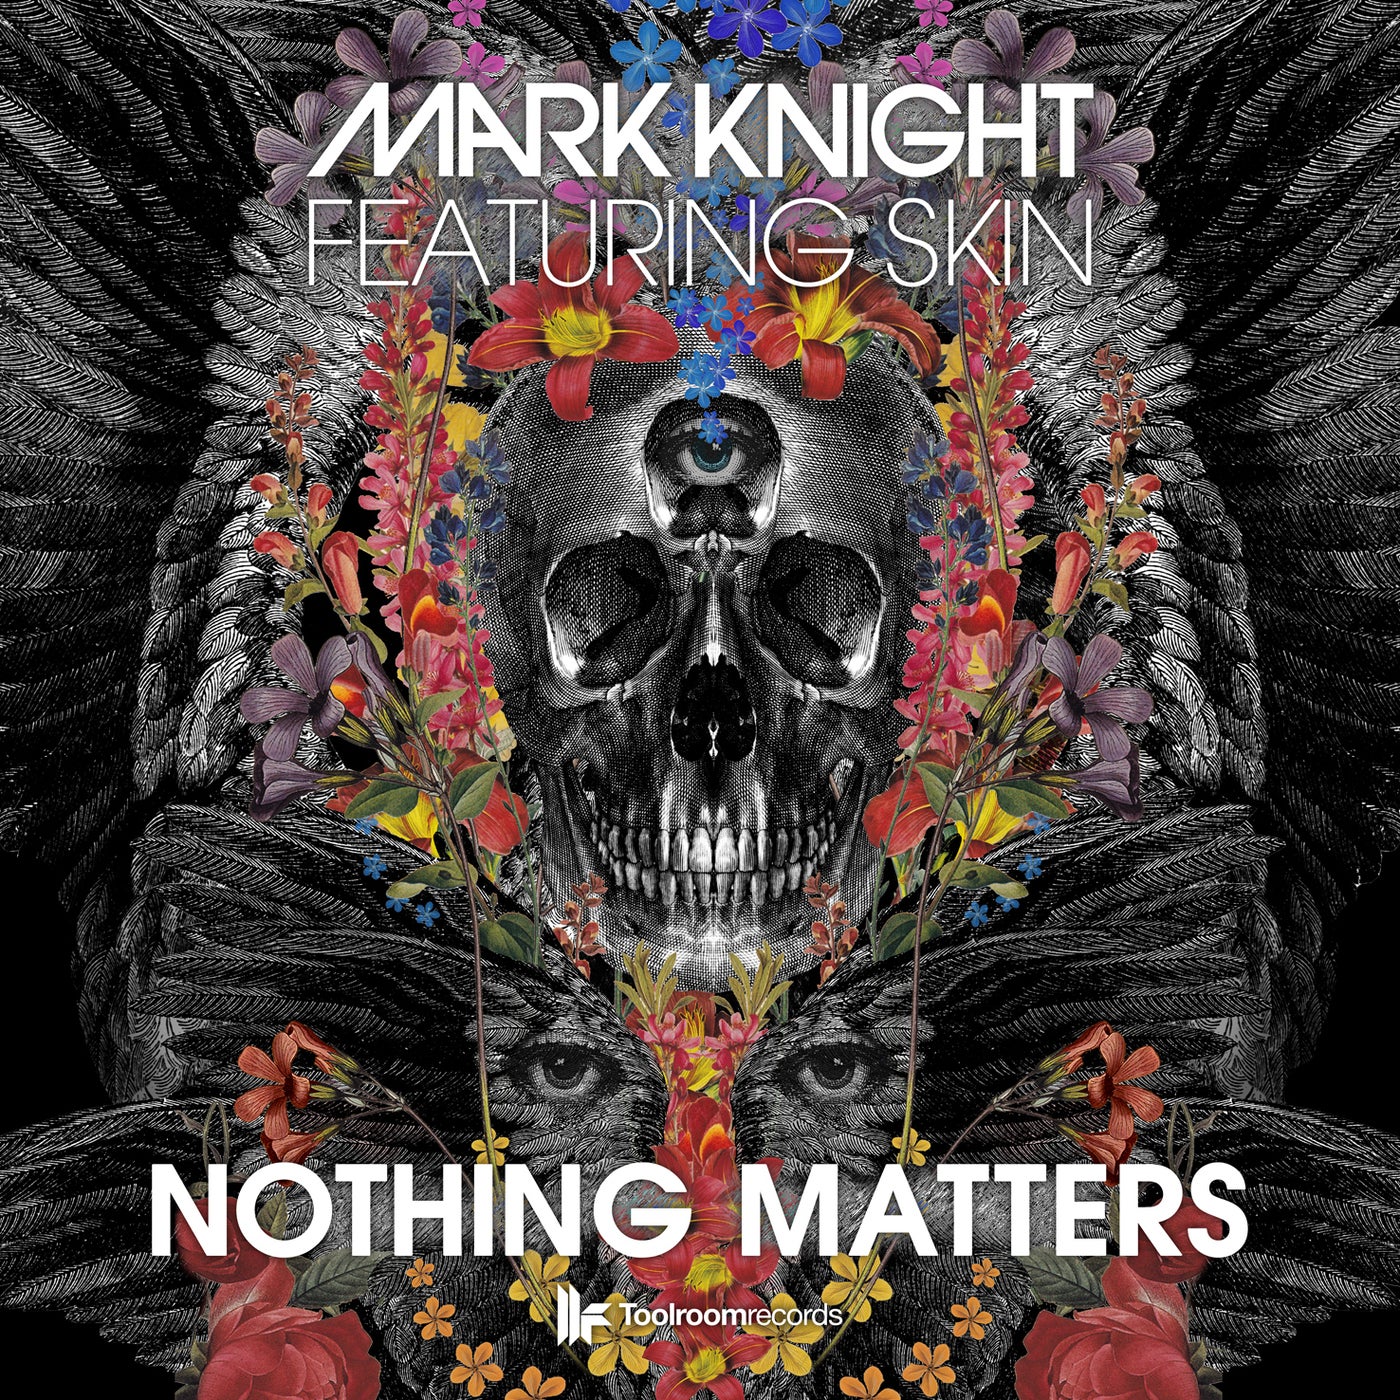 Nothing matters the last. Skin Mark Knight nothing matters Noisia Remix. Skin Mark Knight nothing matters. Nothing matters. Альбом nothing.